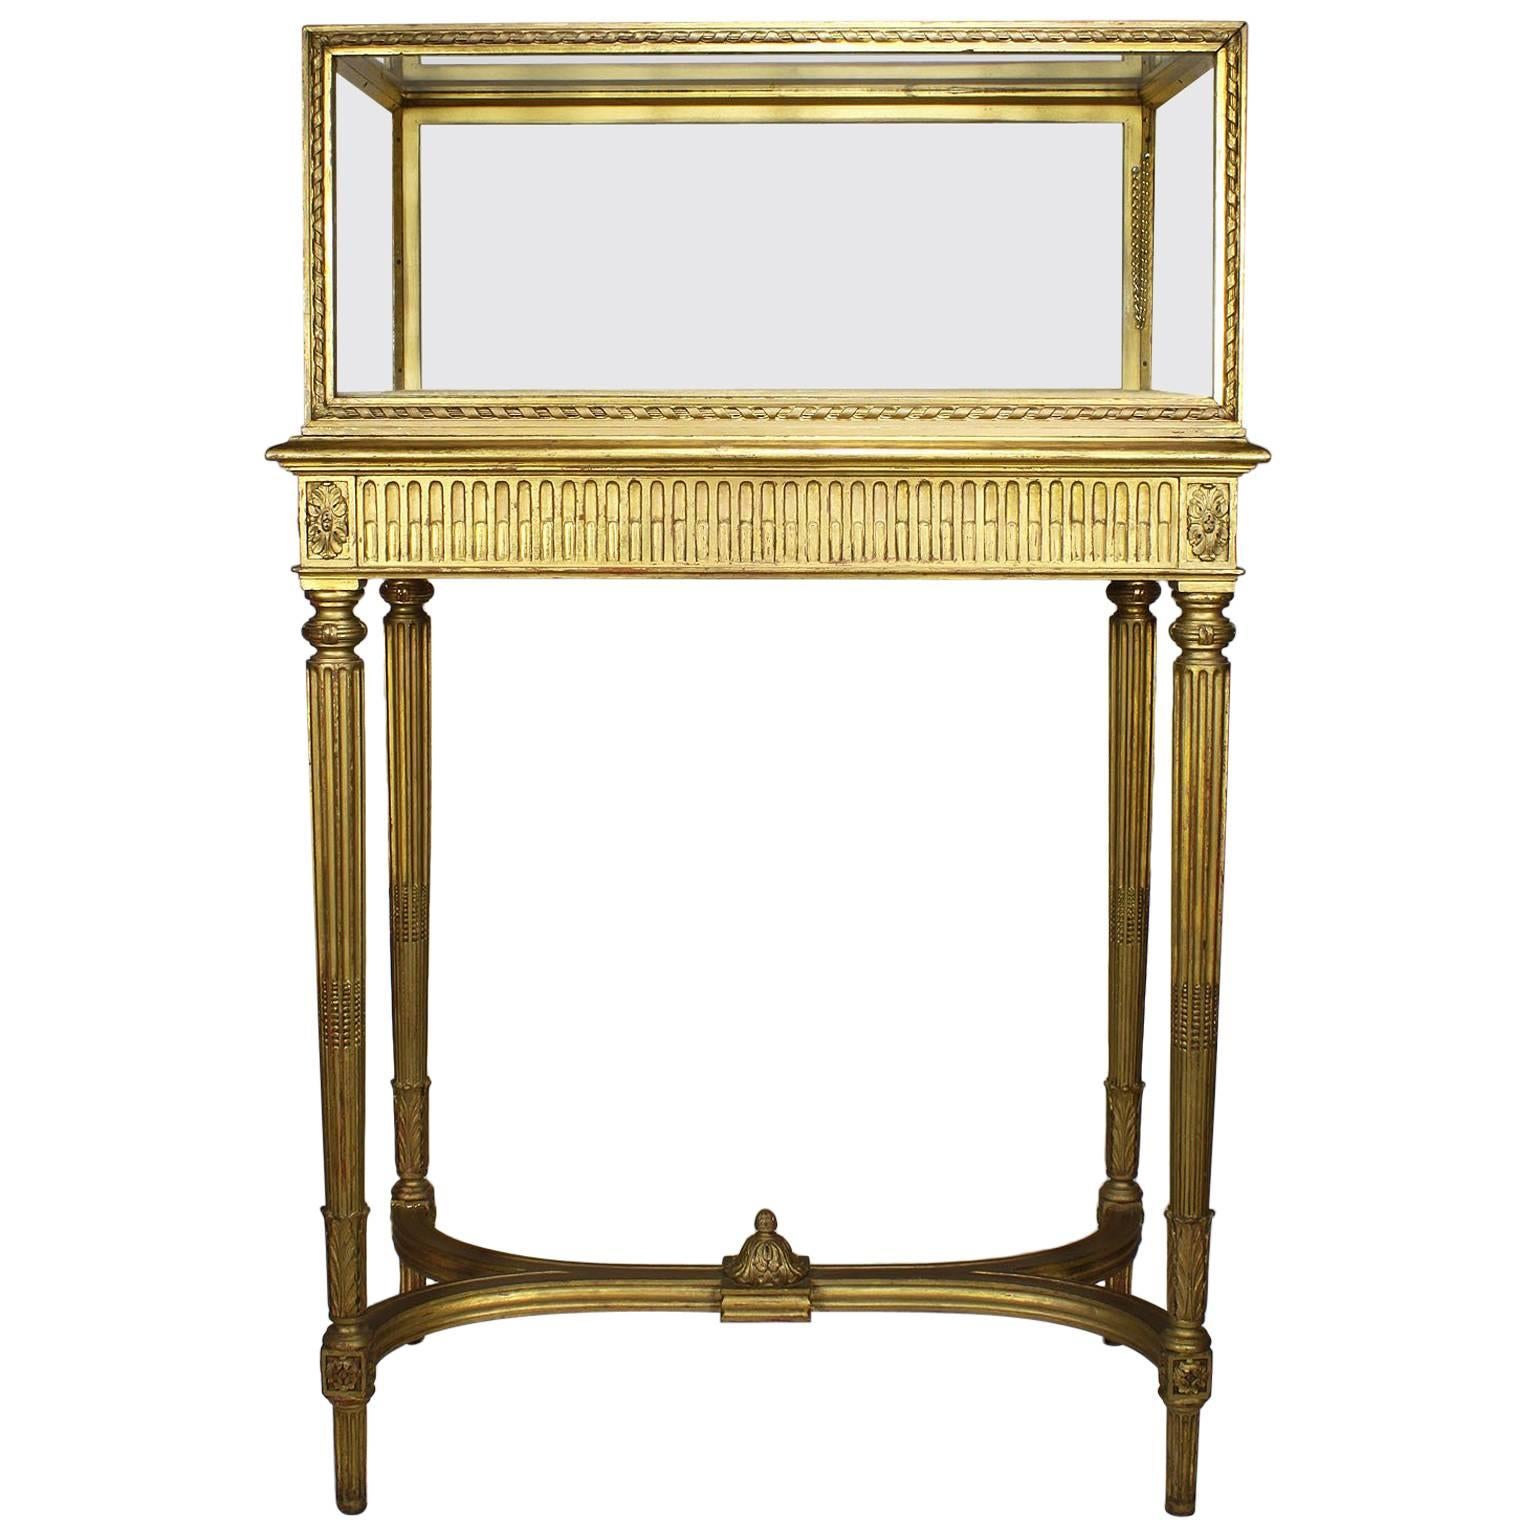 French 19th Century Louis XVI Style Giltwood Carved Exhibition Vitrine Table